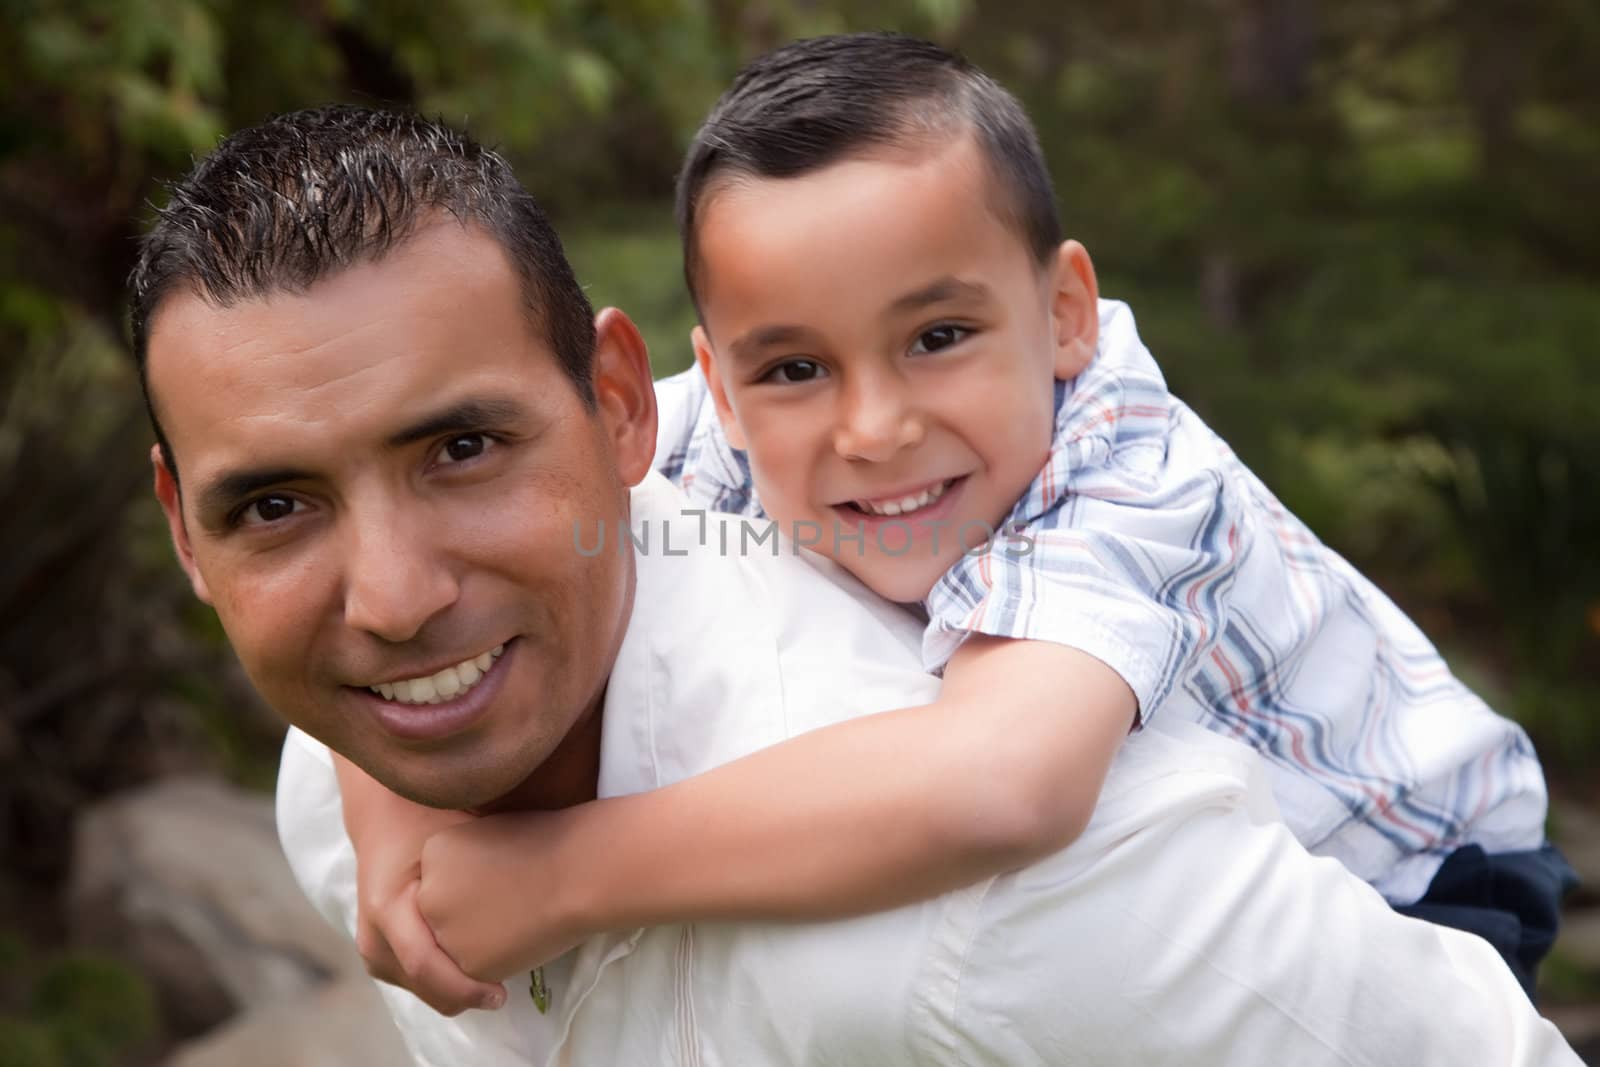 Hispanic Father and Son Having Fun in the Park by Feverpitched